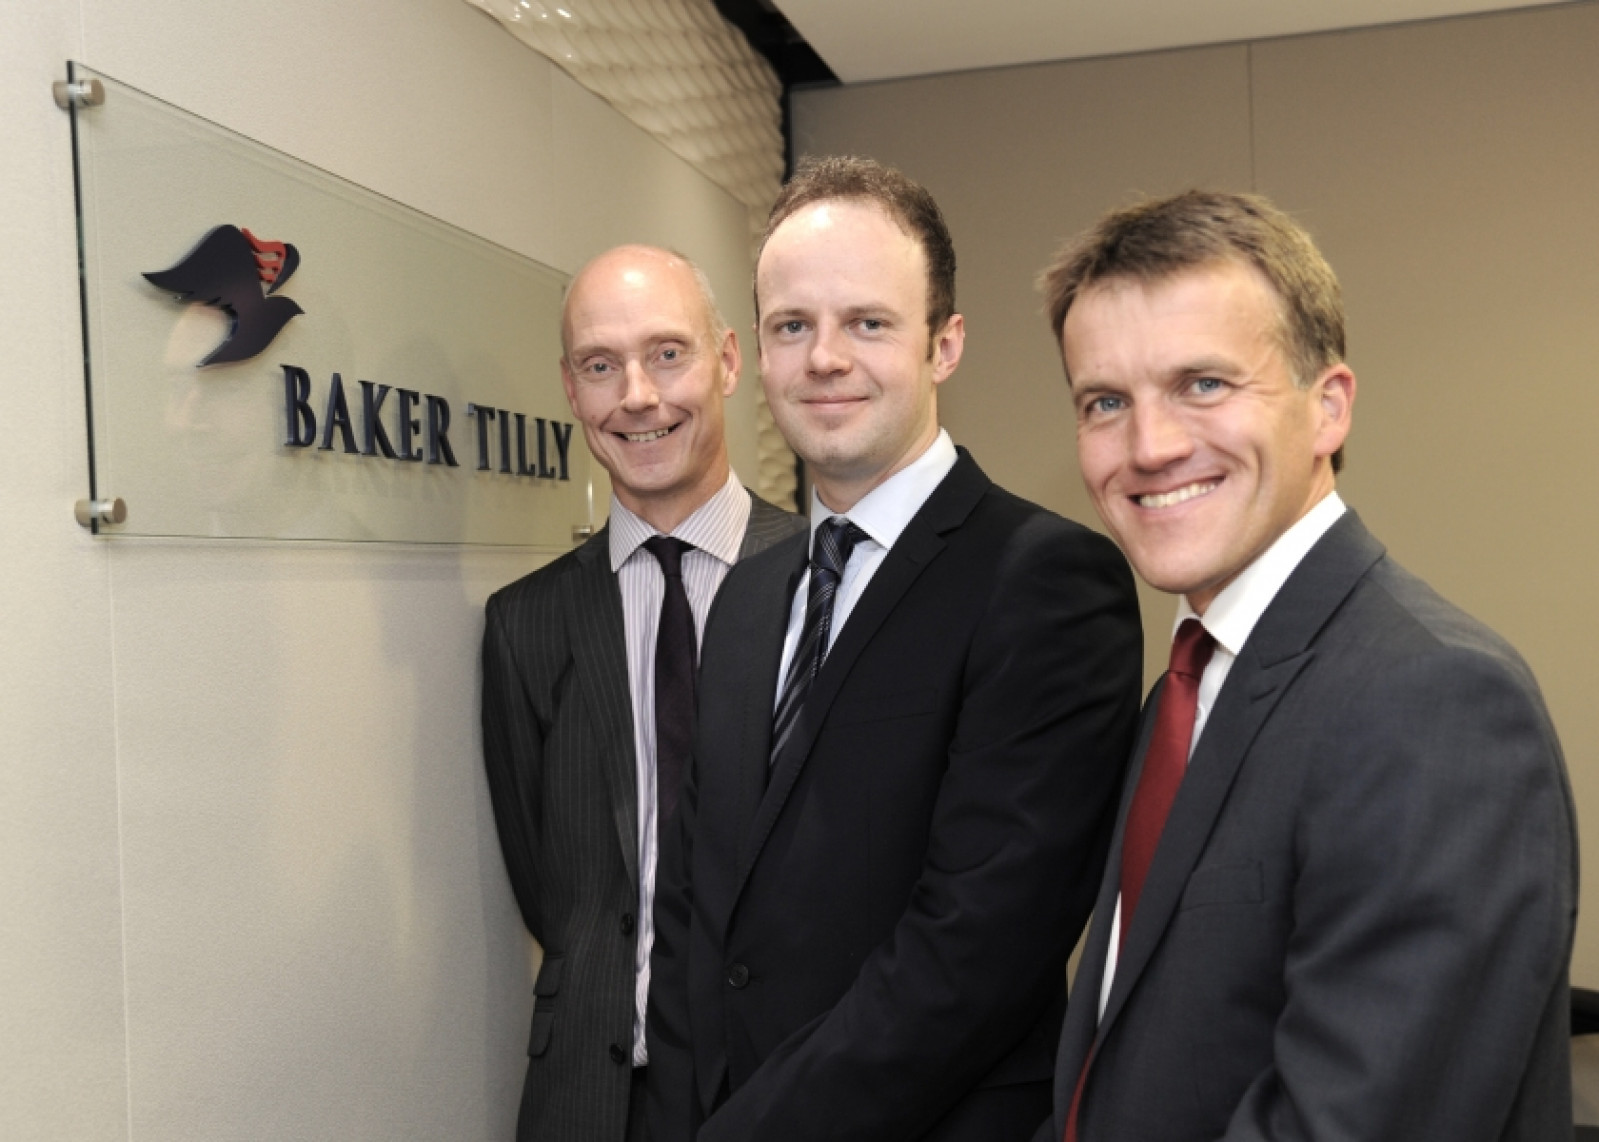 Made in the Midlands partners with Baker Tilly to...